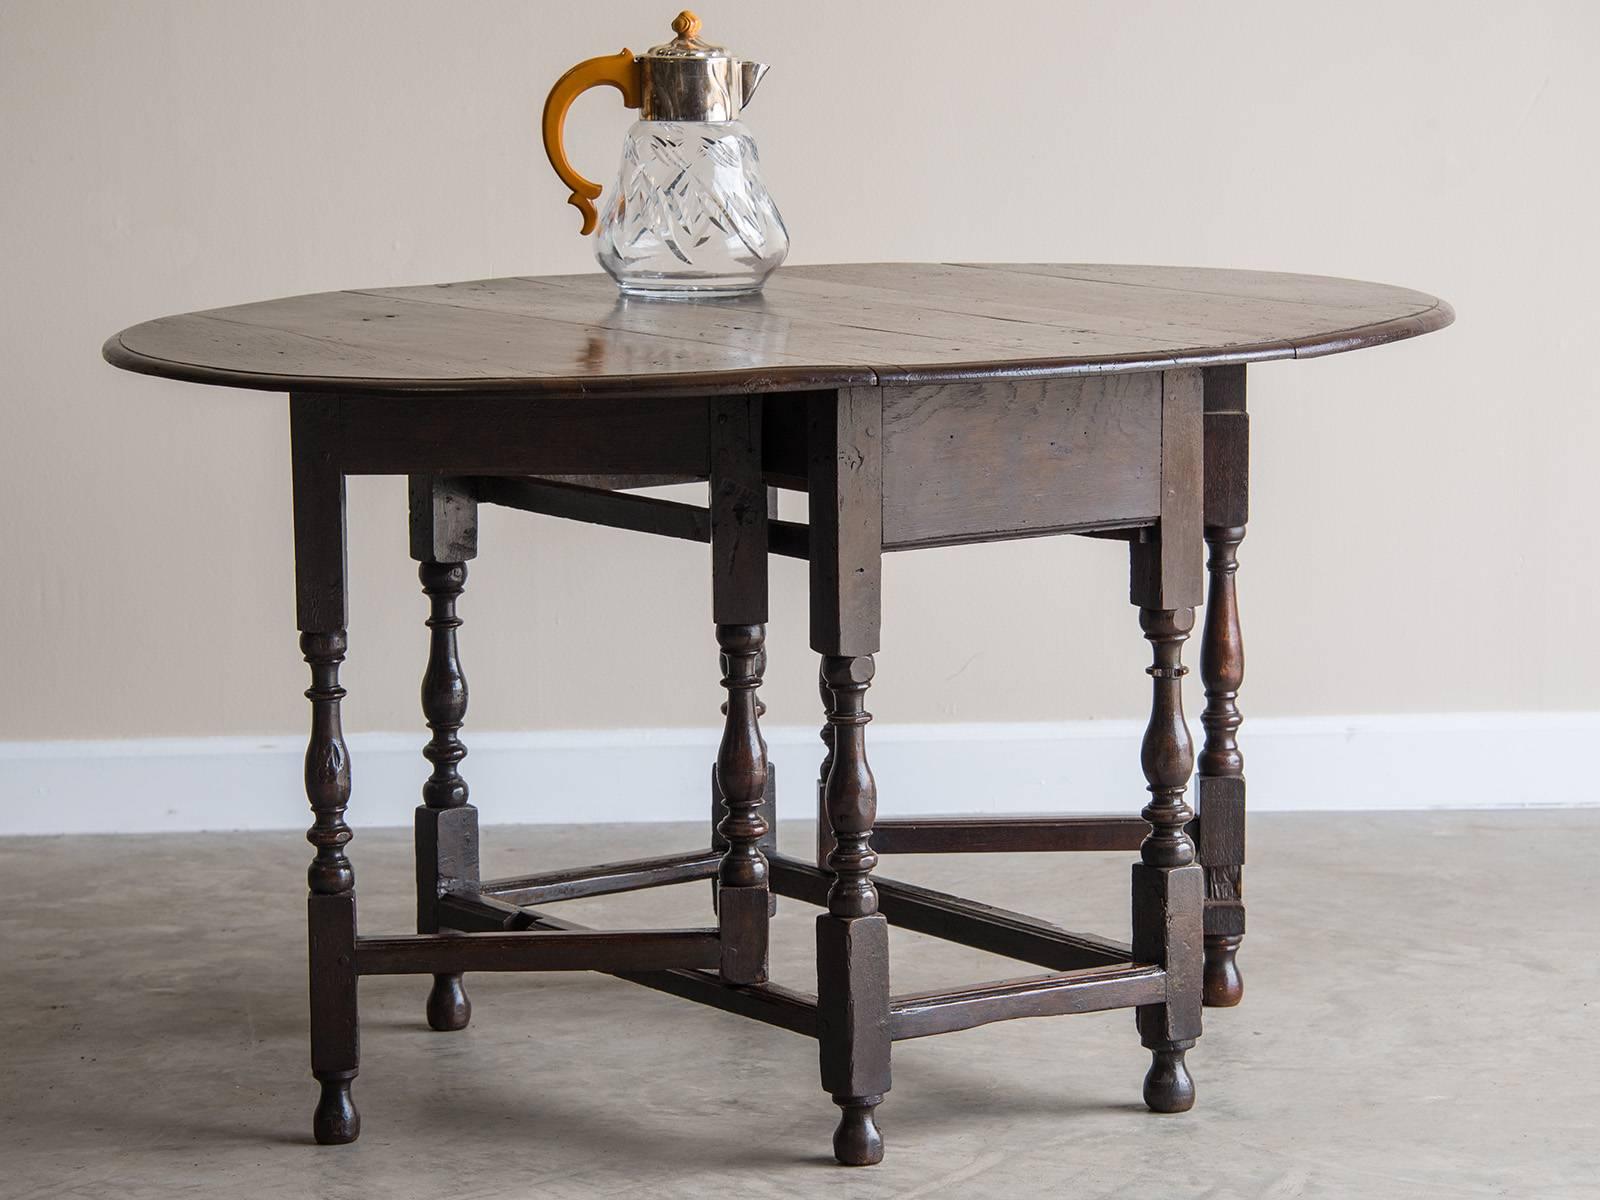 Antique English George III Oak Drop Leaf Table with Drawer, circa 1790 In Excellent Condition For Sale In Houston, TX